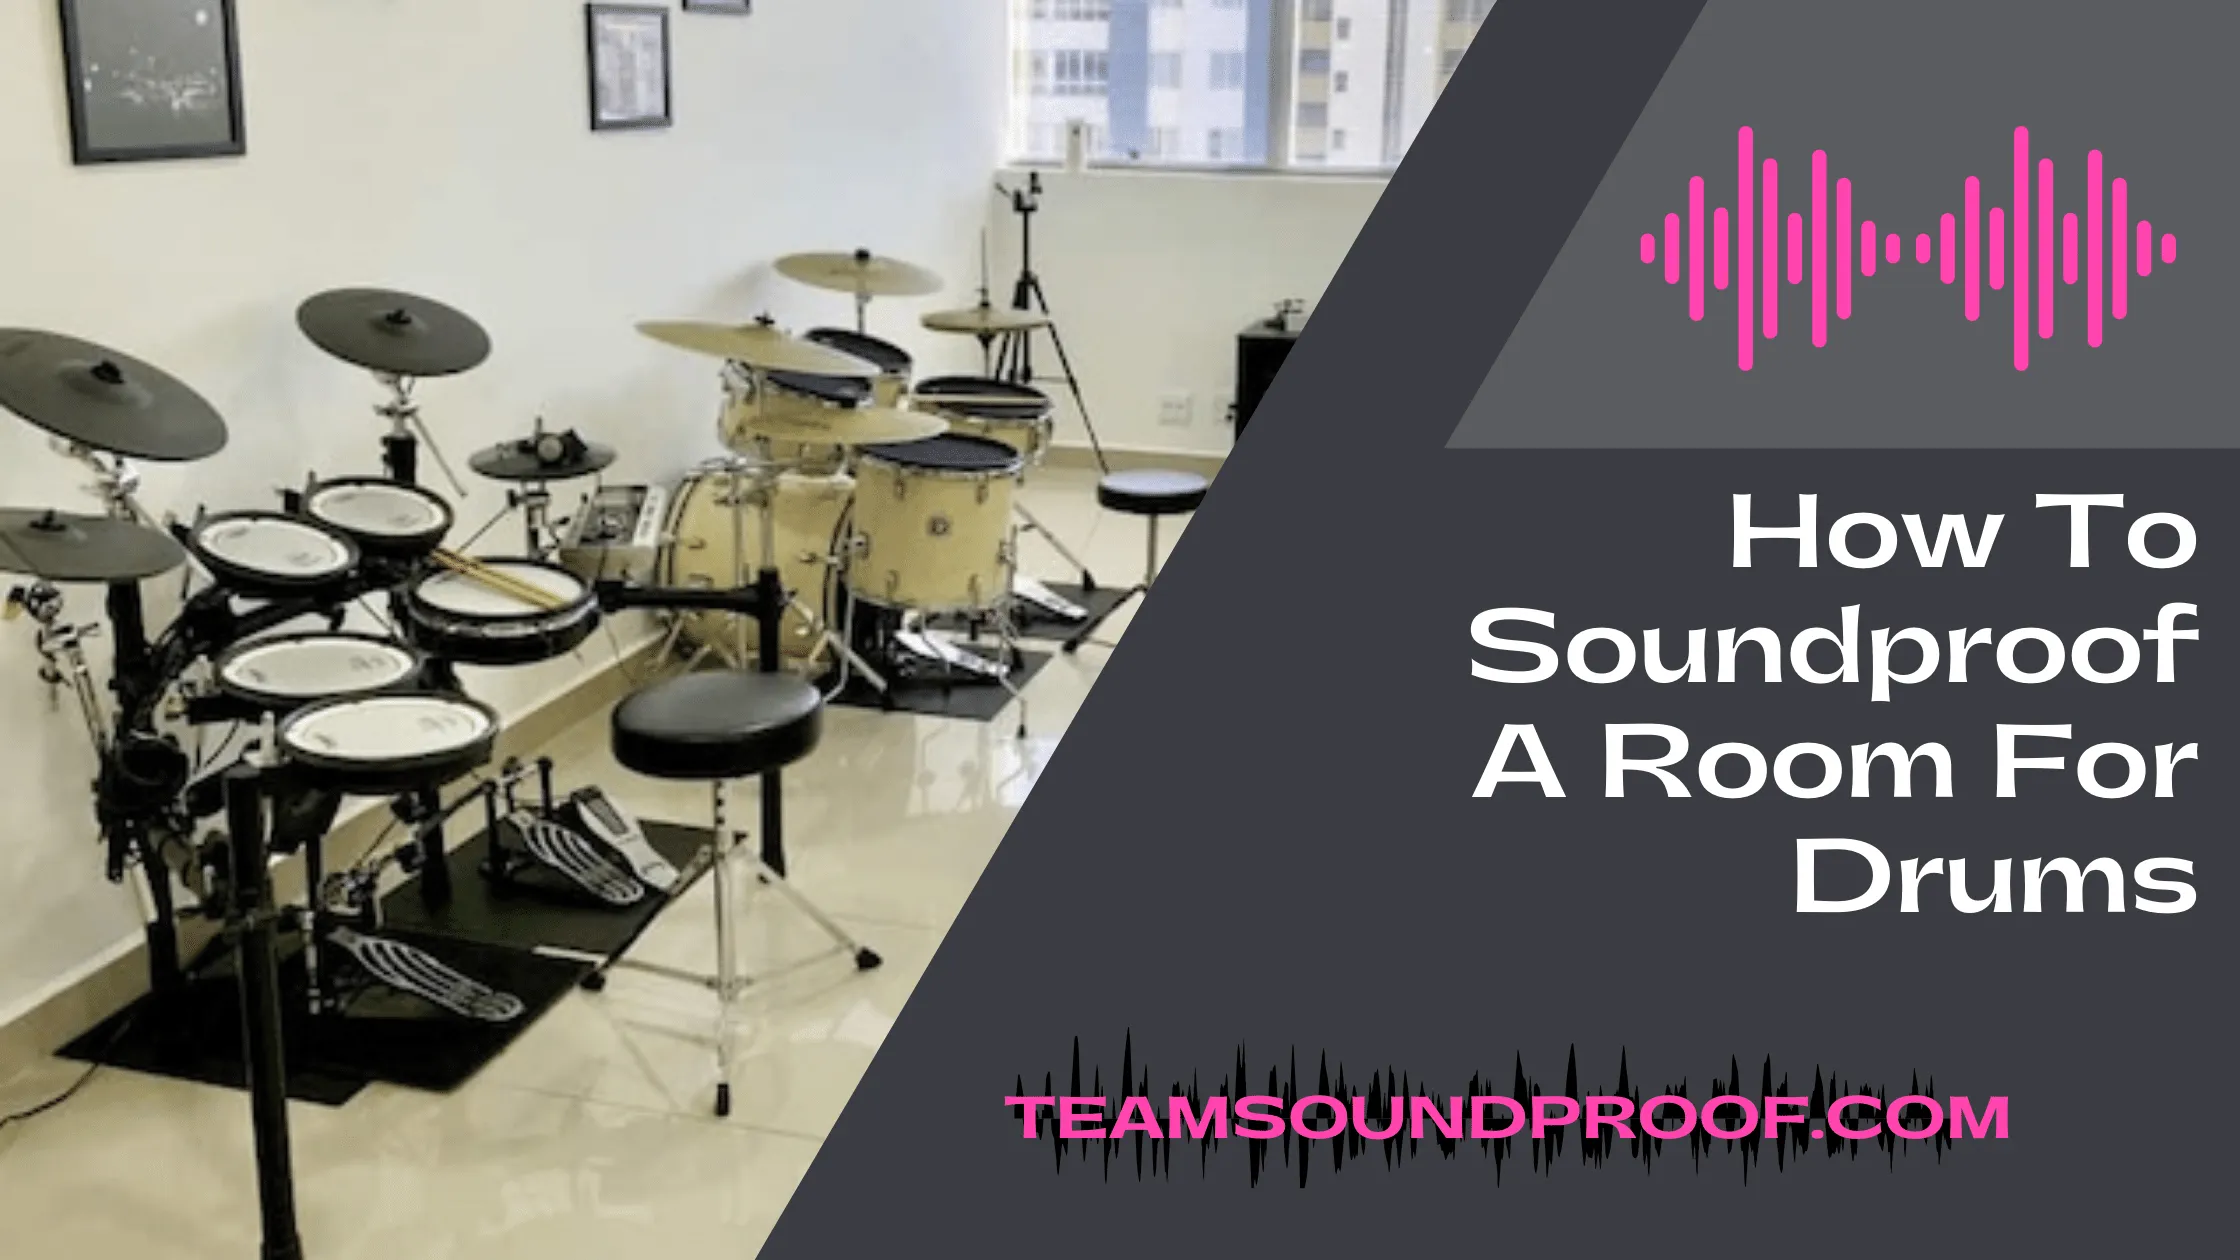 How to Soundproof a Room For Drums? #1 Guide